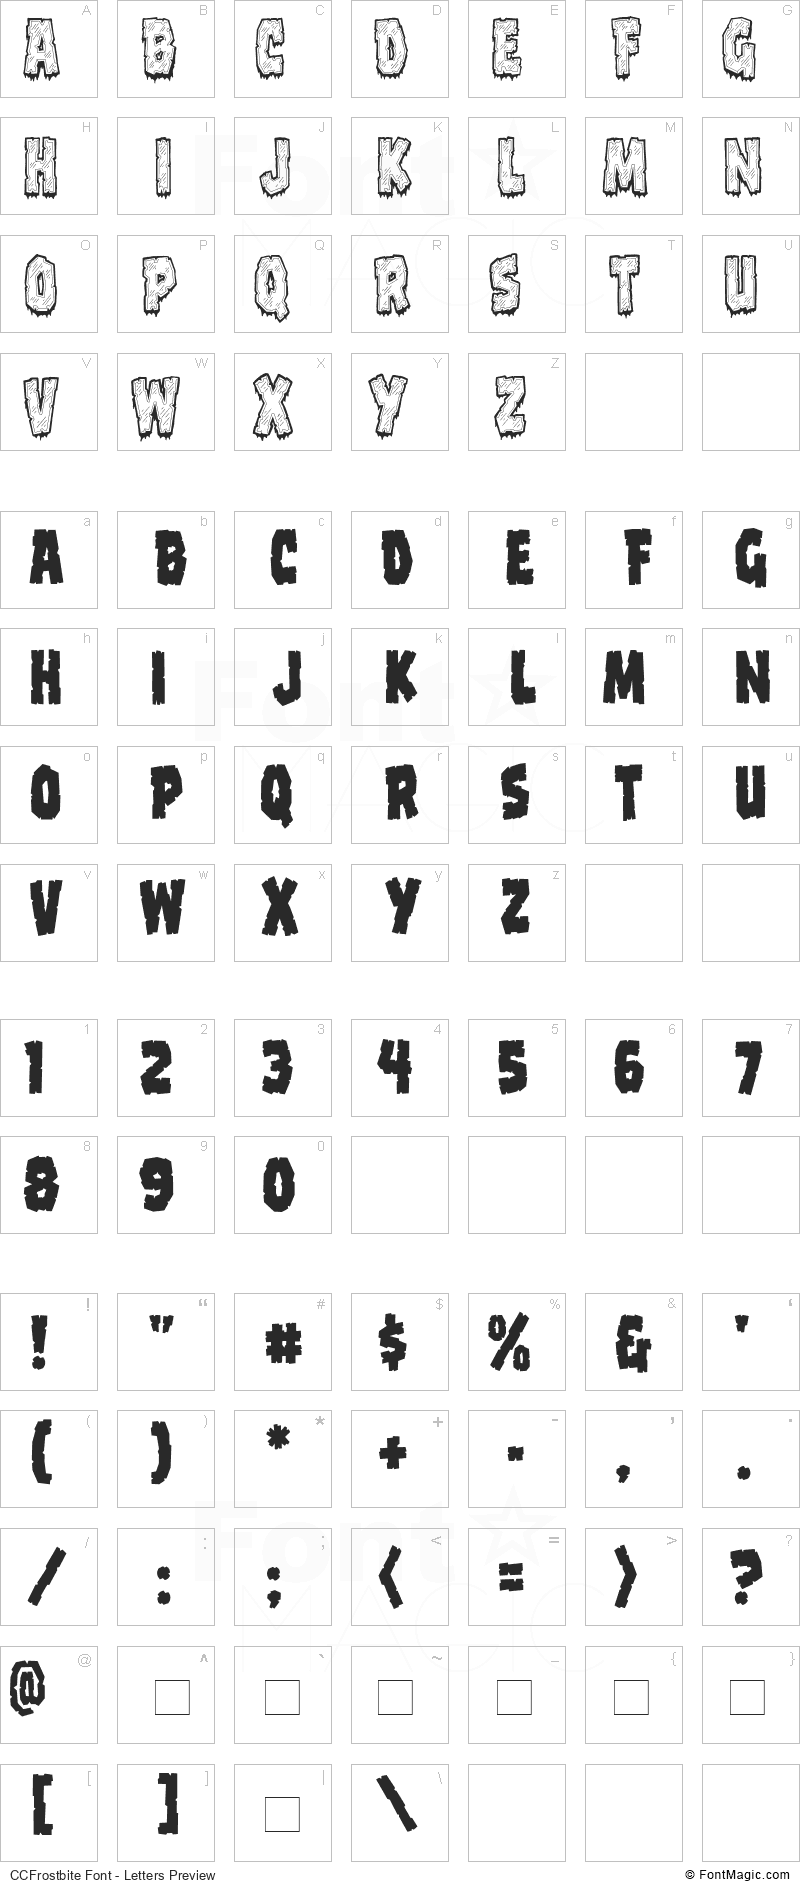 CCFrostbite Font - All Latters Preview Chart